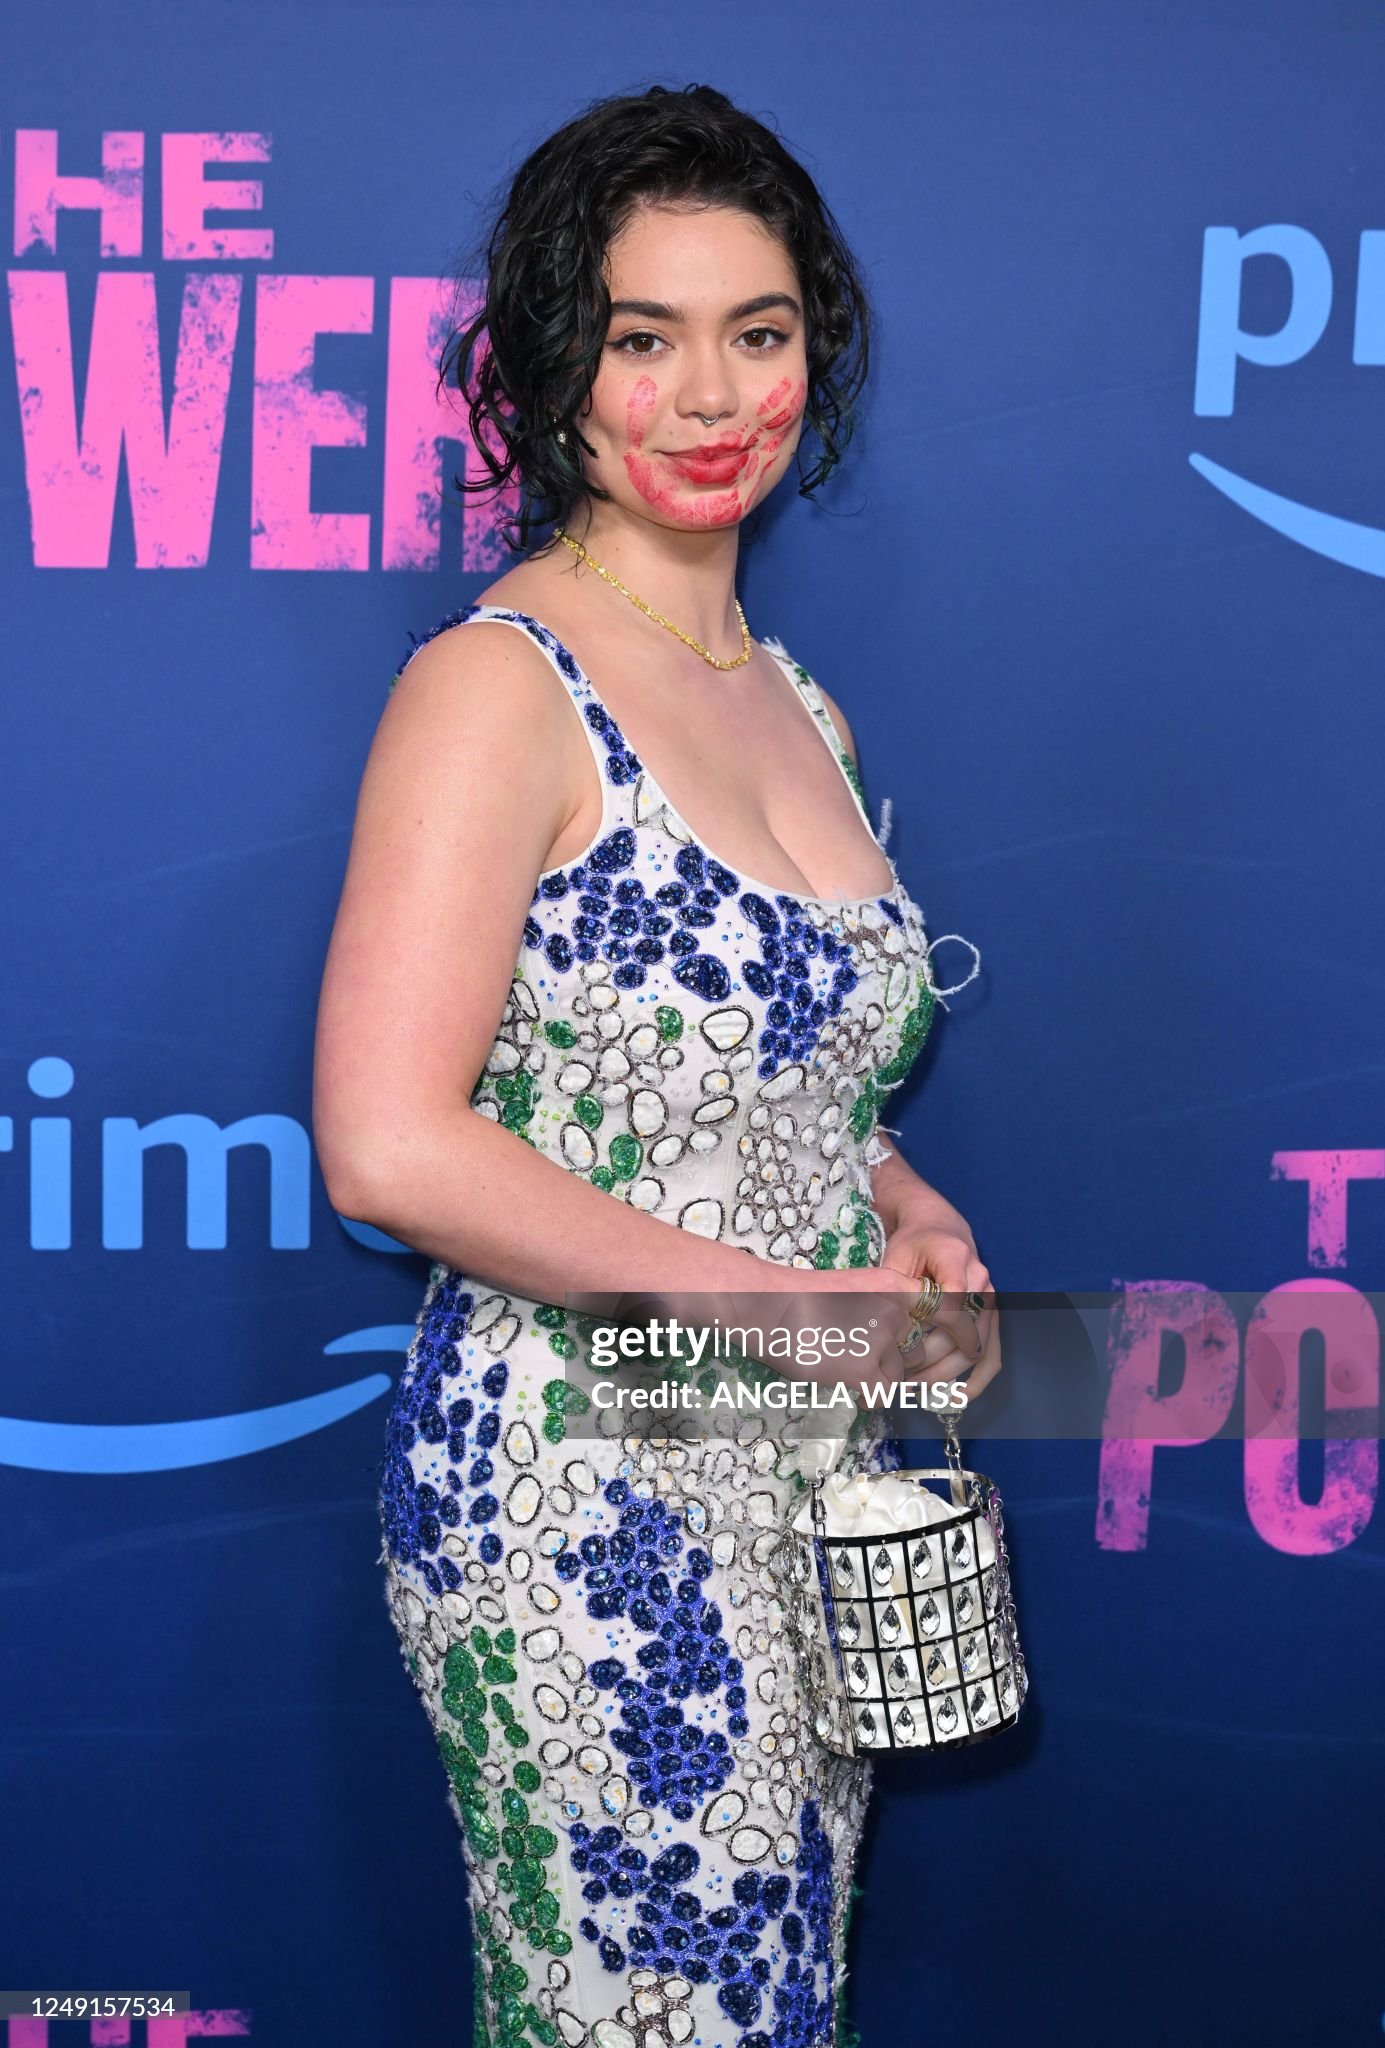 Auli'i Cravalho - arrives for the Prime Video drama series "The Power" premiere in New York City, on March 23, 2023